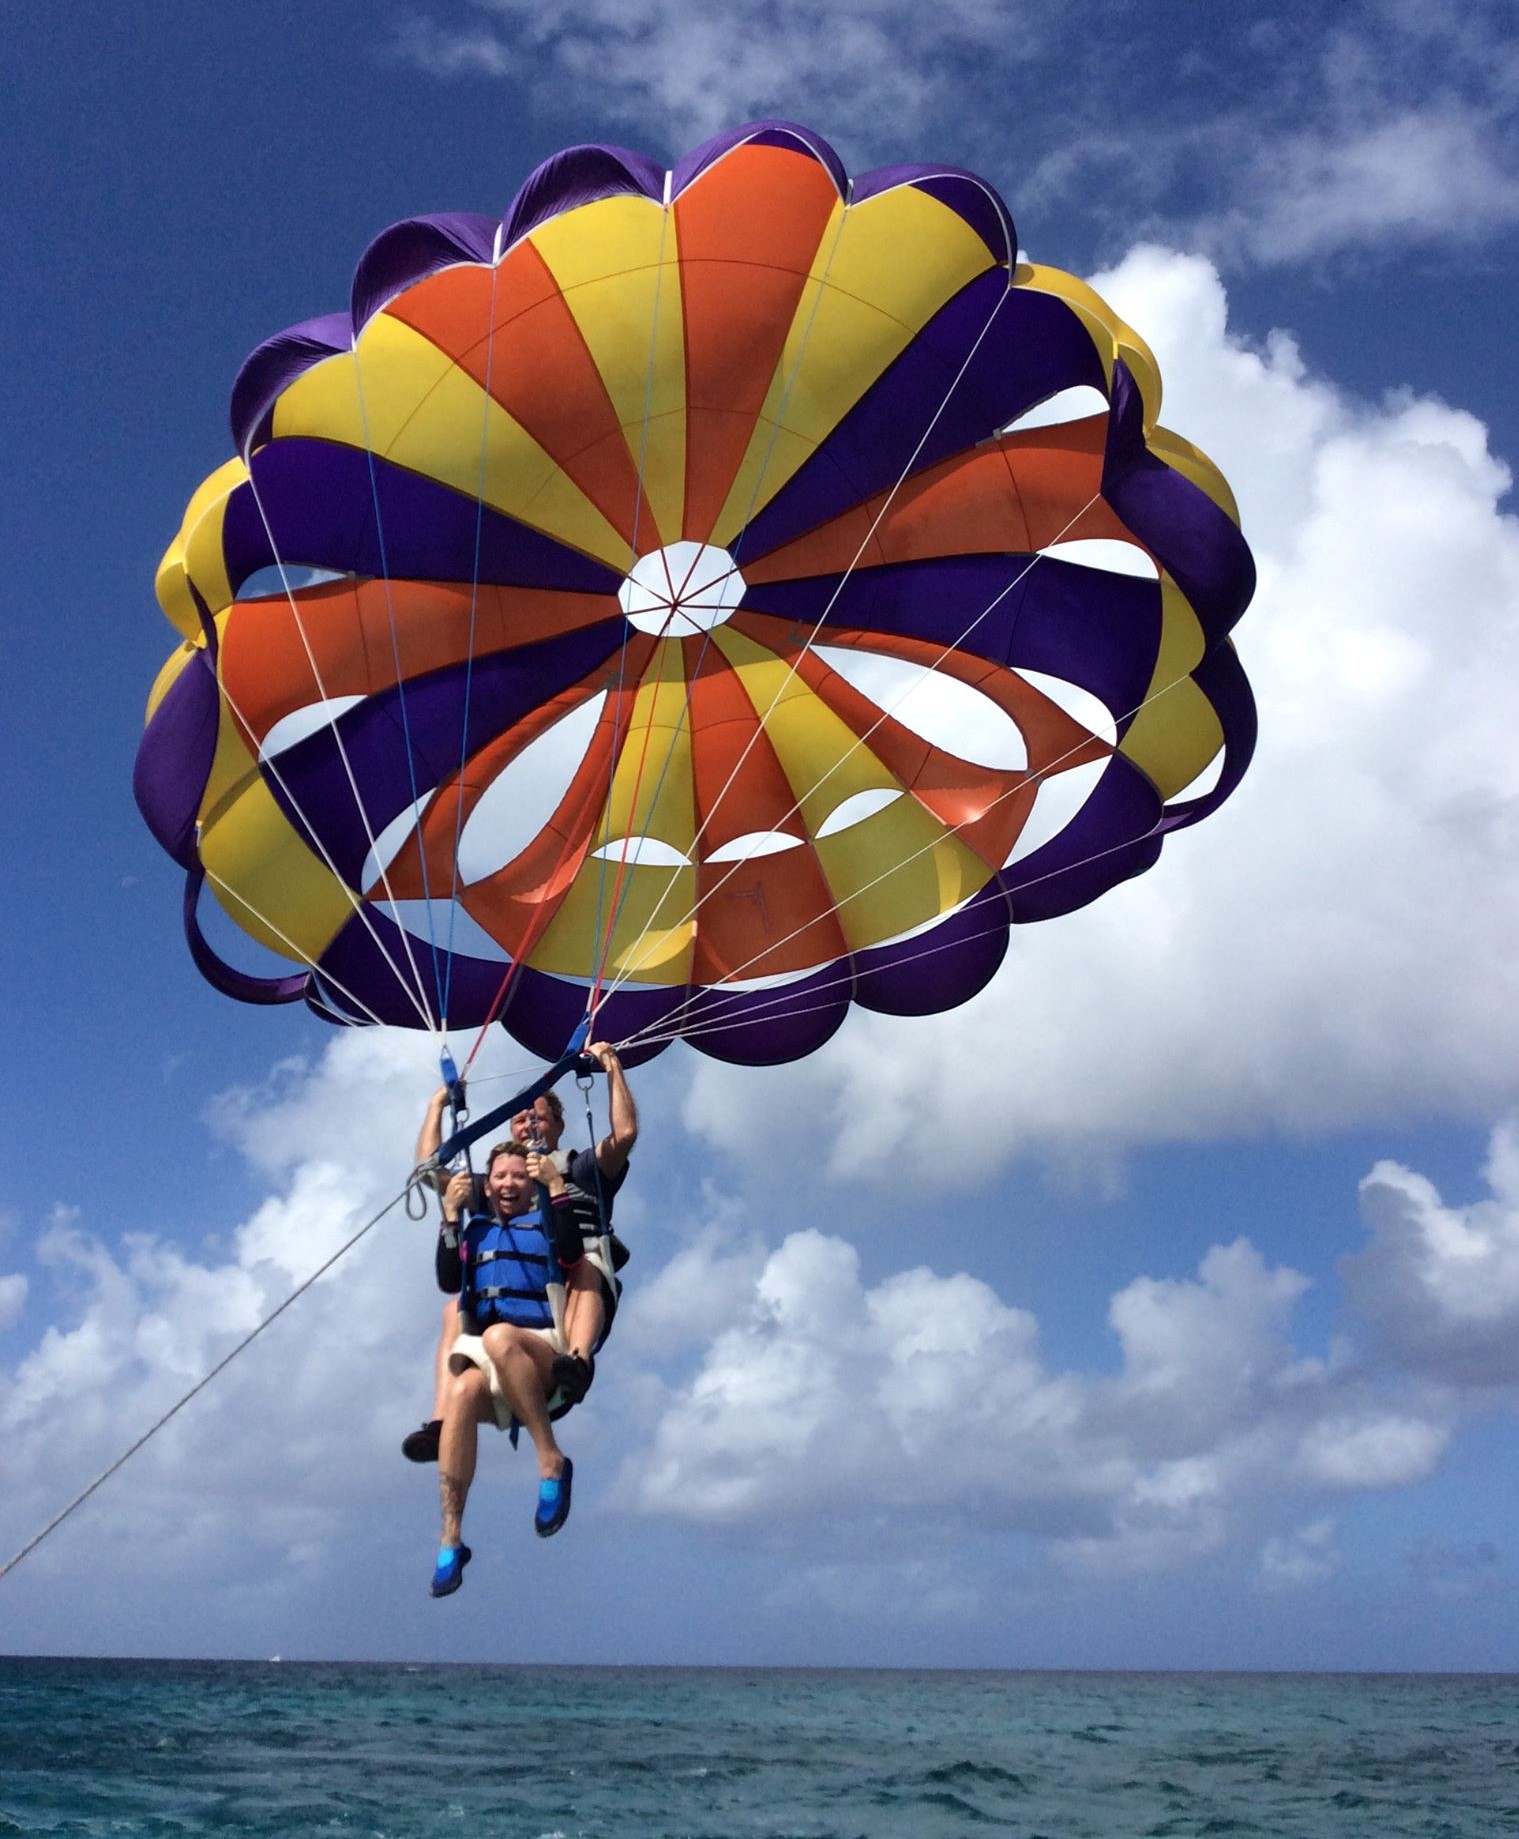 PARASAILING EXCITEMENT BY AWC Aruba - vacaystore.com